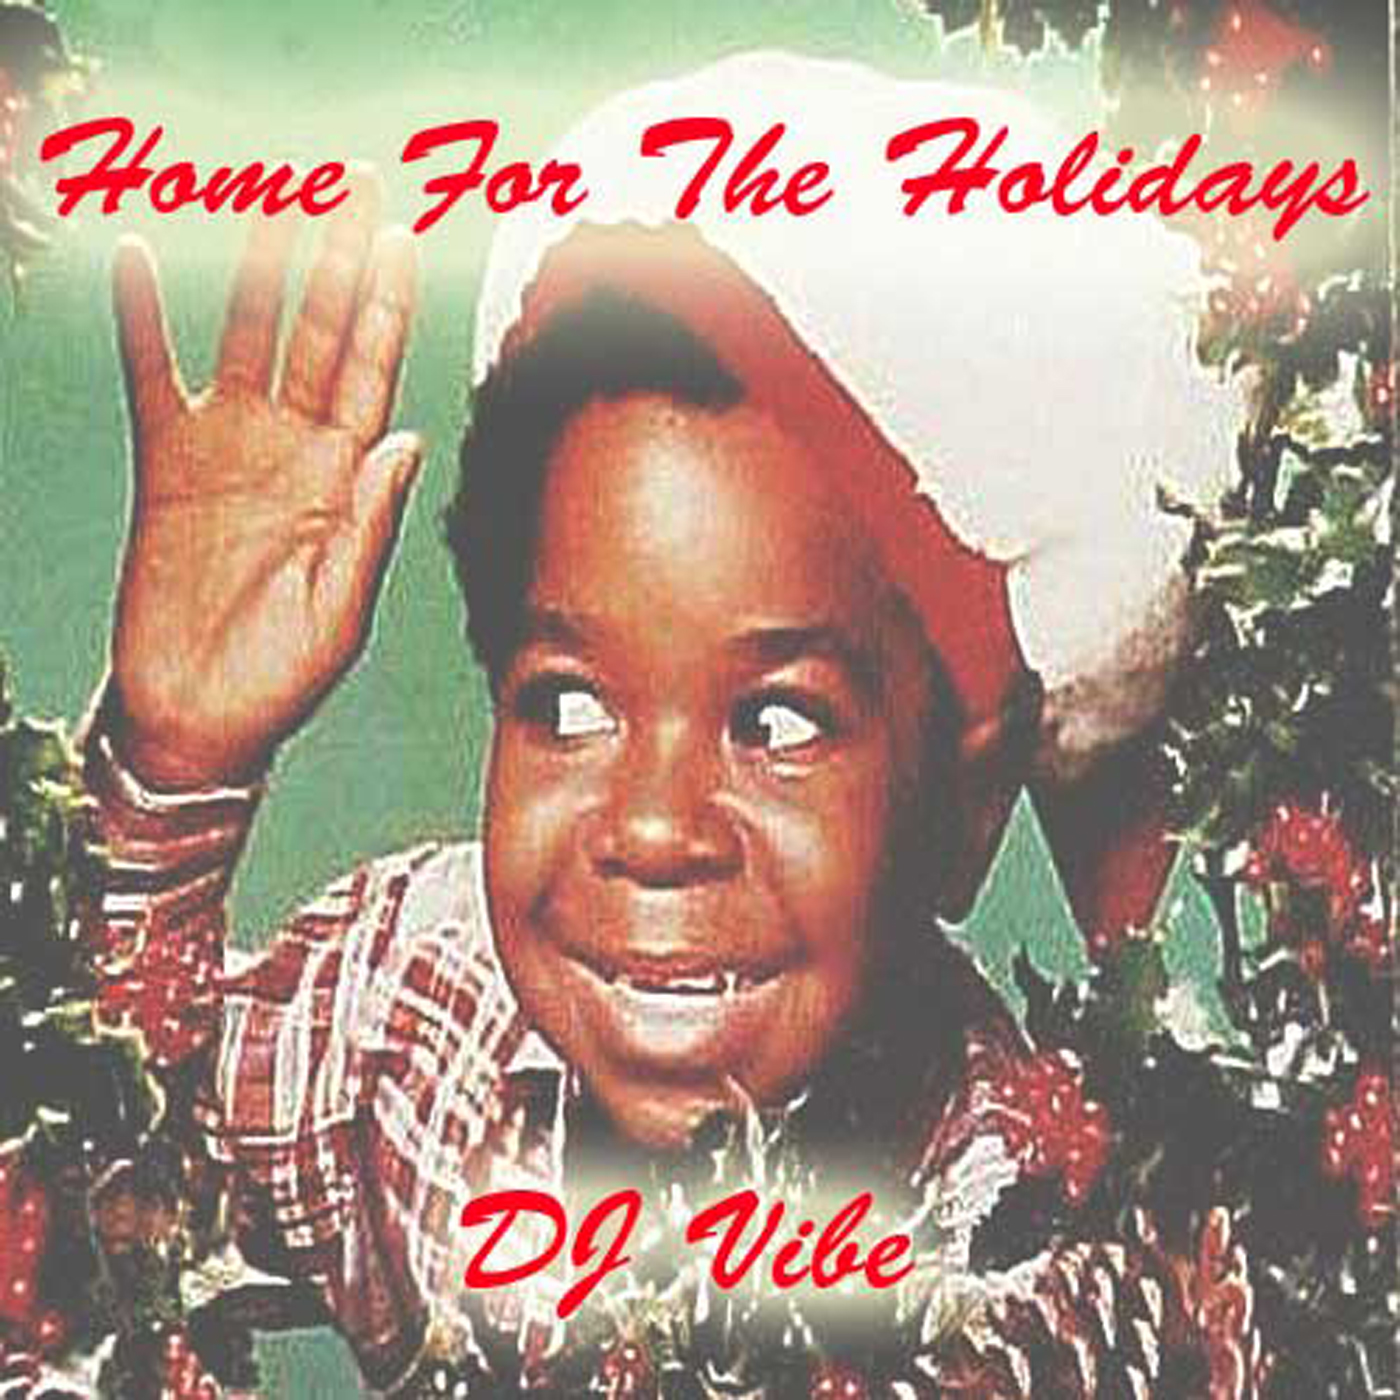 DJ Vibe Episode #7: Home For The Holidays